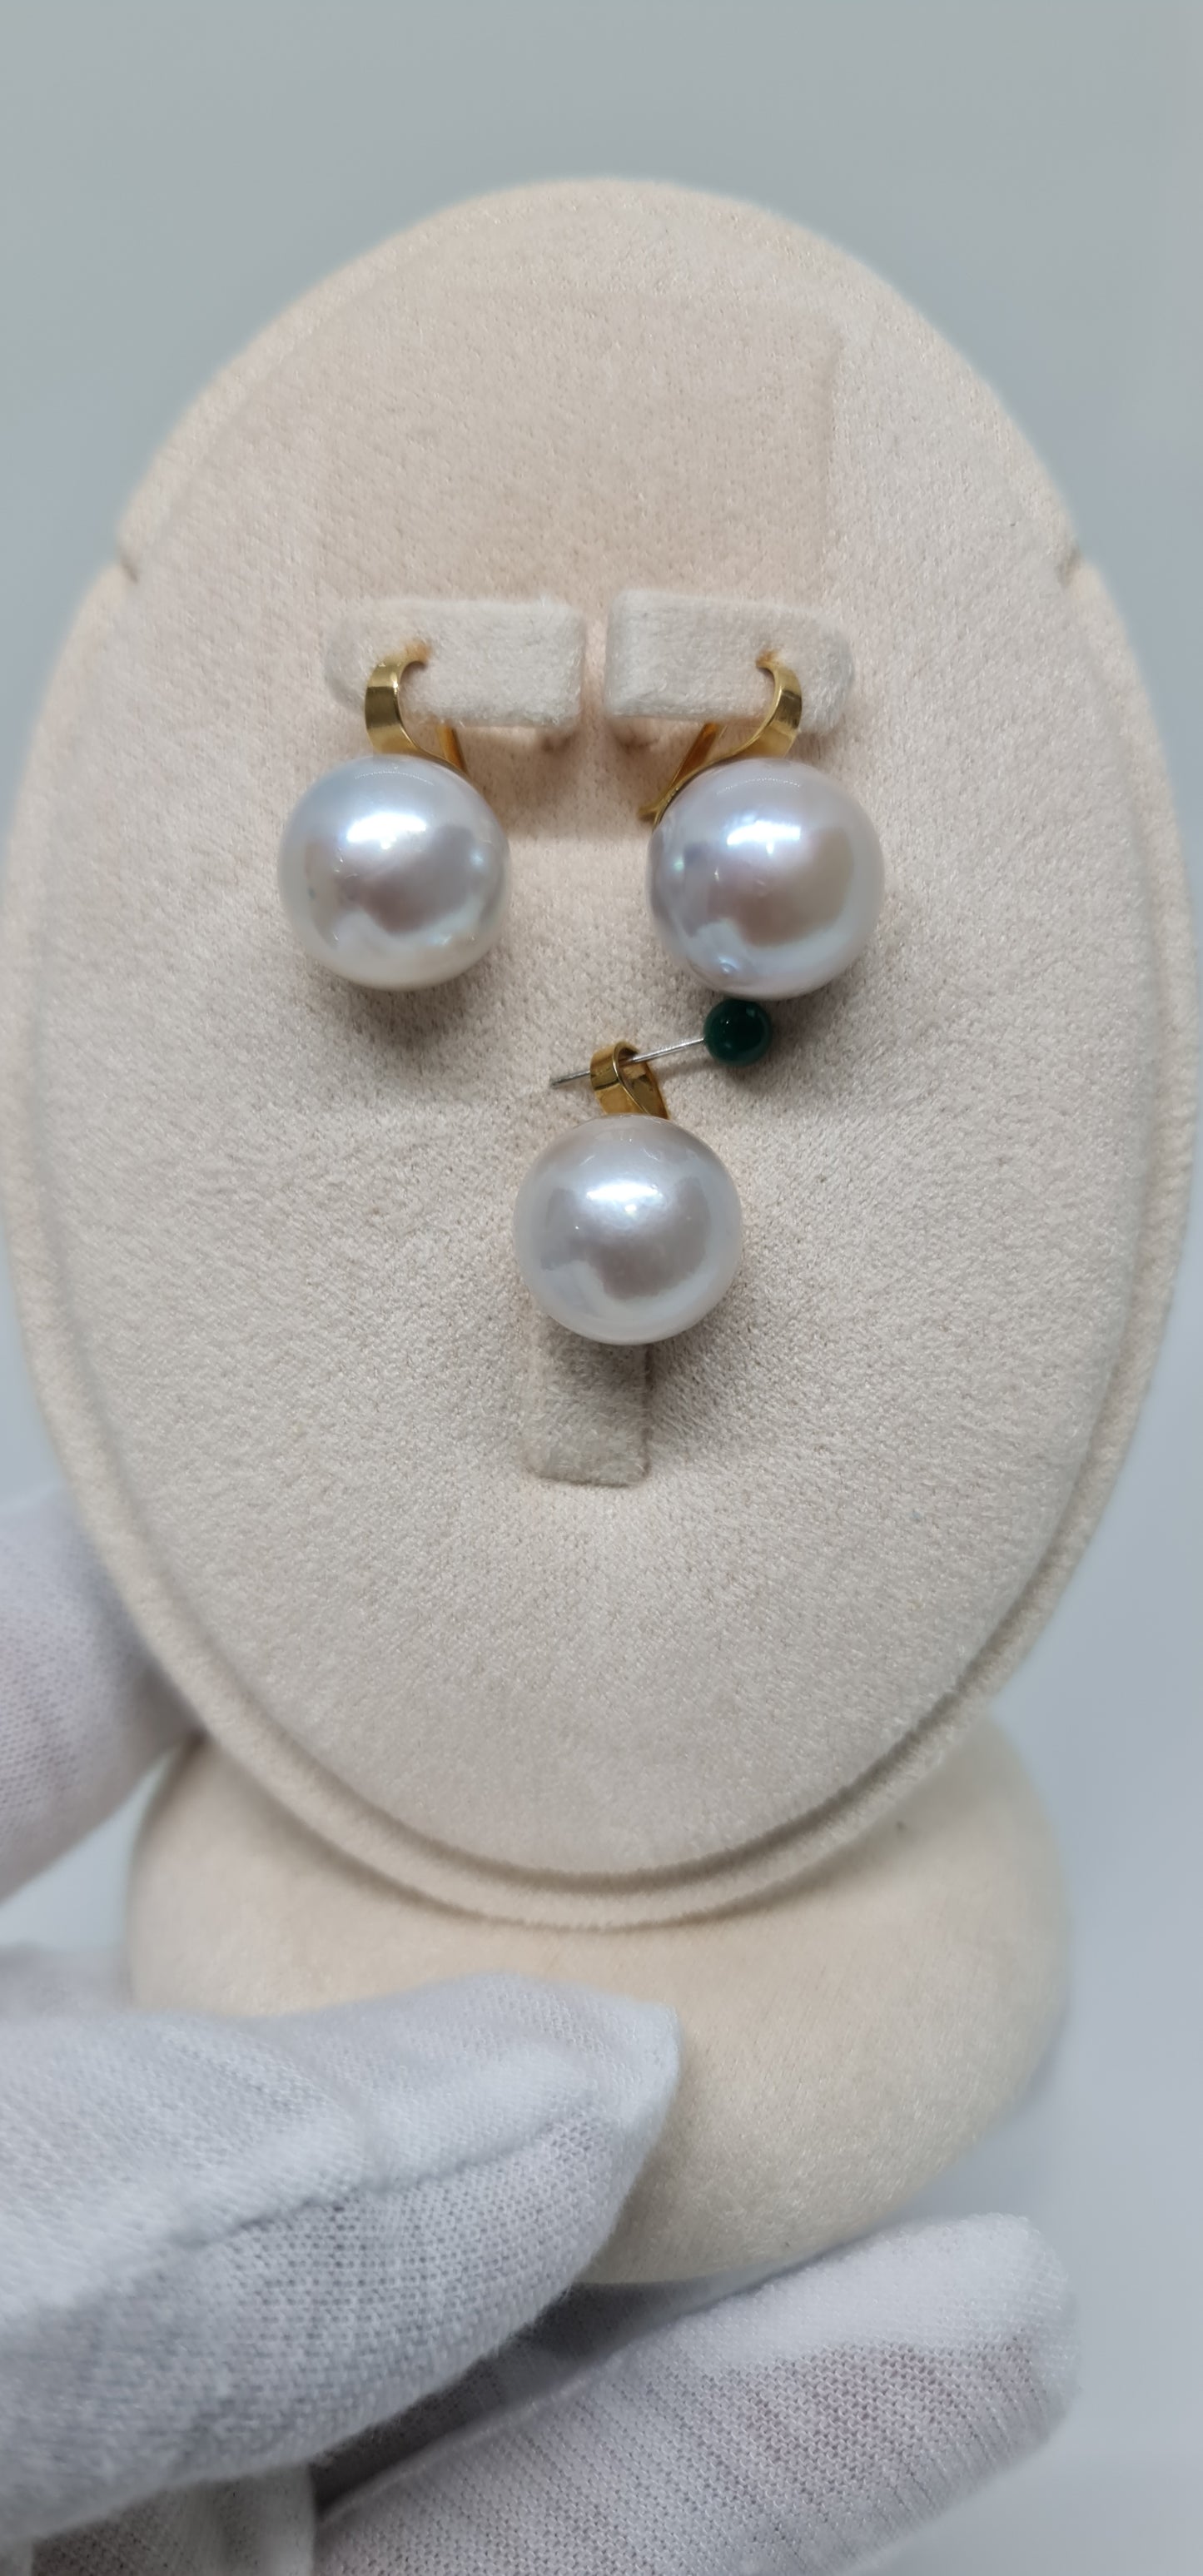 13.3mm to 13.6mm Classic White South Sea Pearls Set in 14K Gold